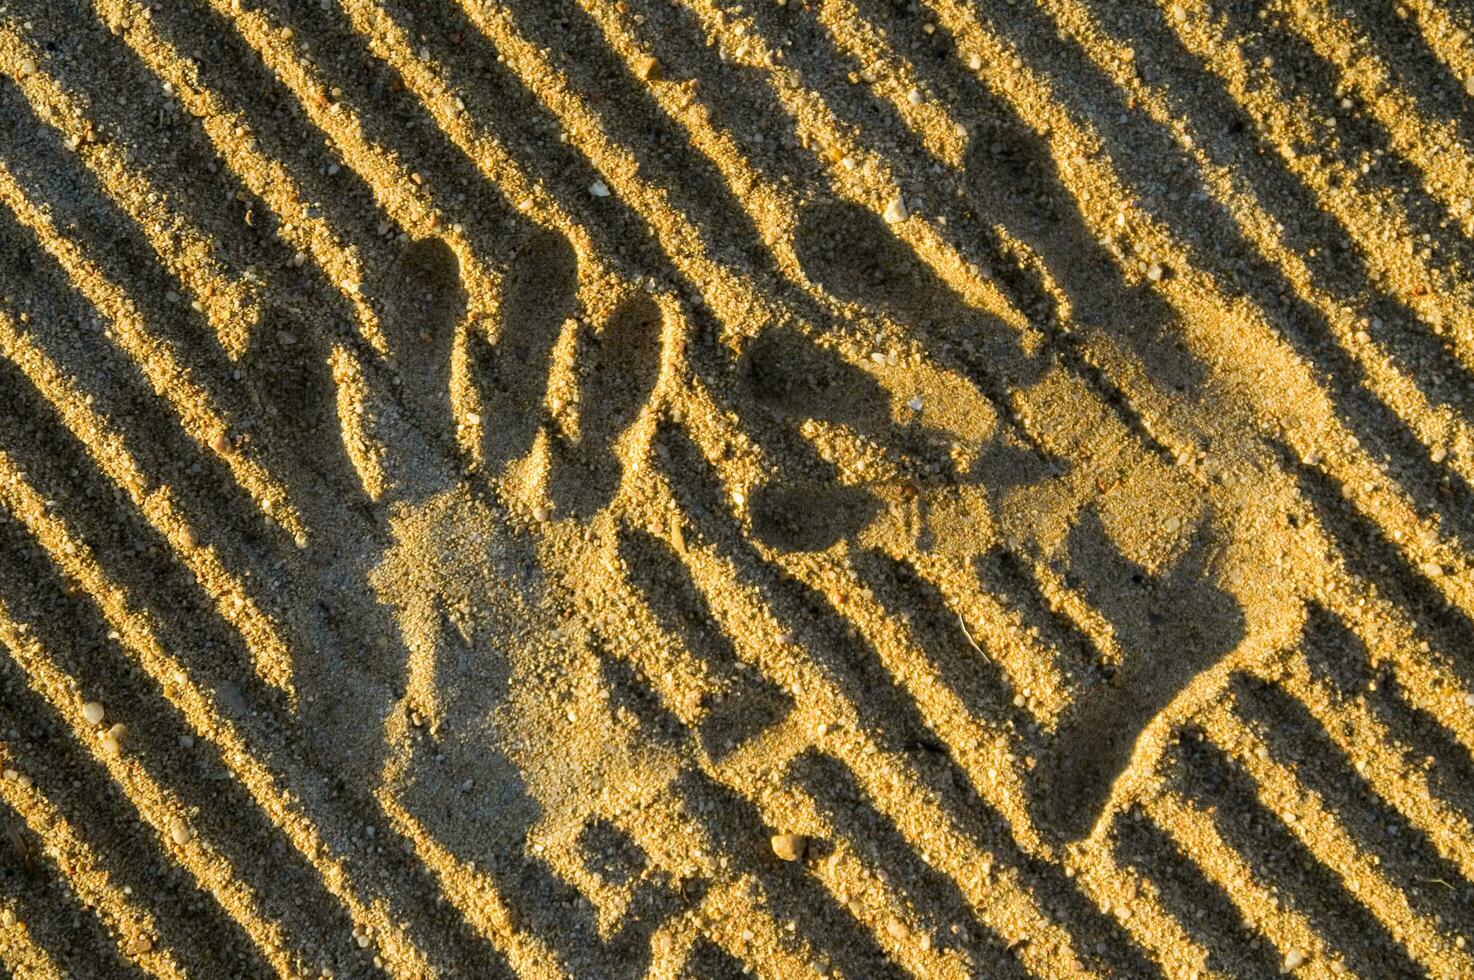 a hand print in the sand with two hands photo